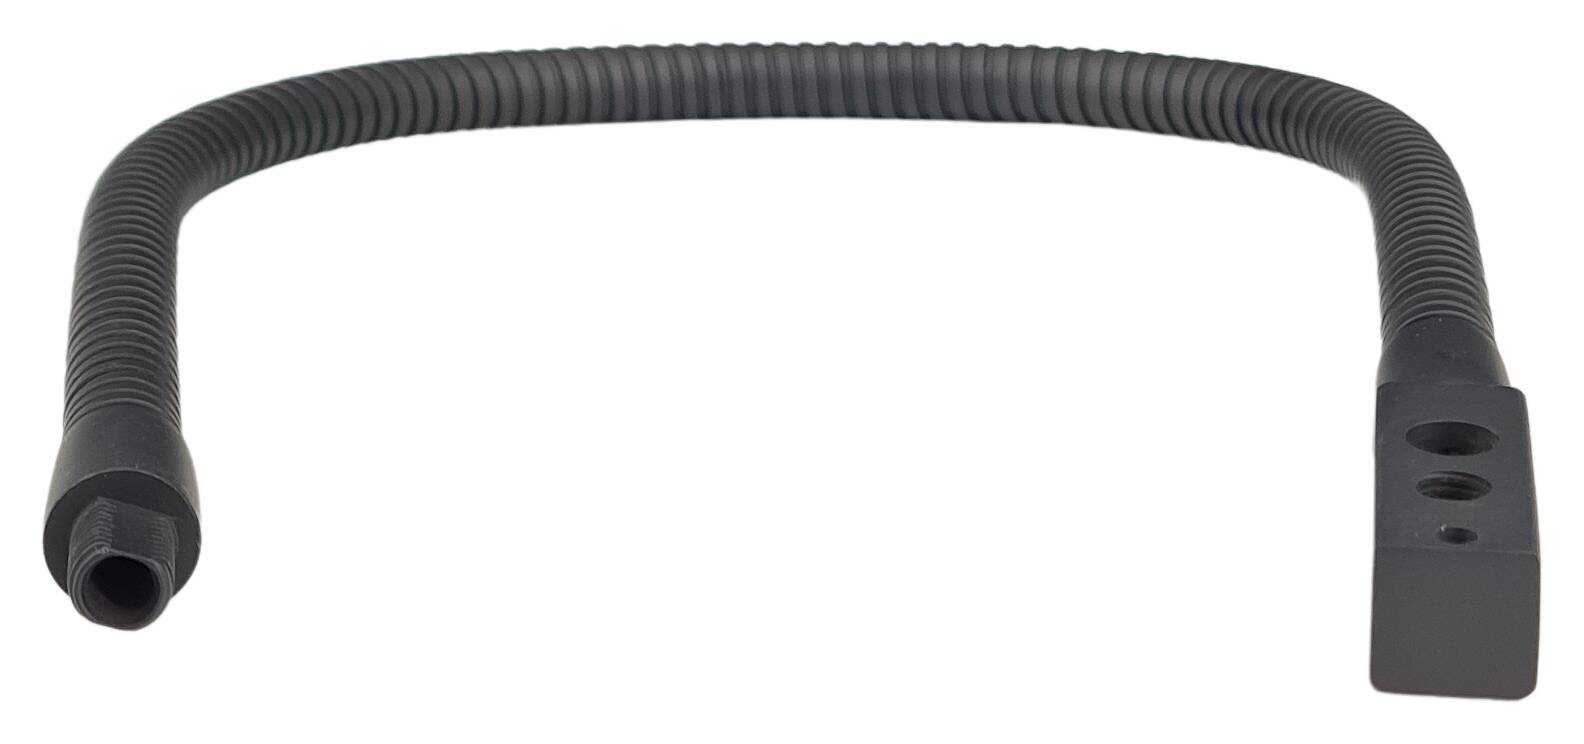 iron flex tube 10x4,8x400 male/male M8x1x10 profile - M8x1x6 round RAL 7021 anthracite